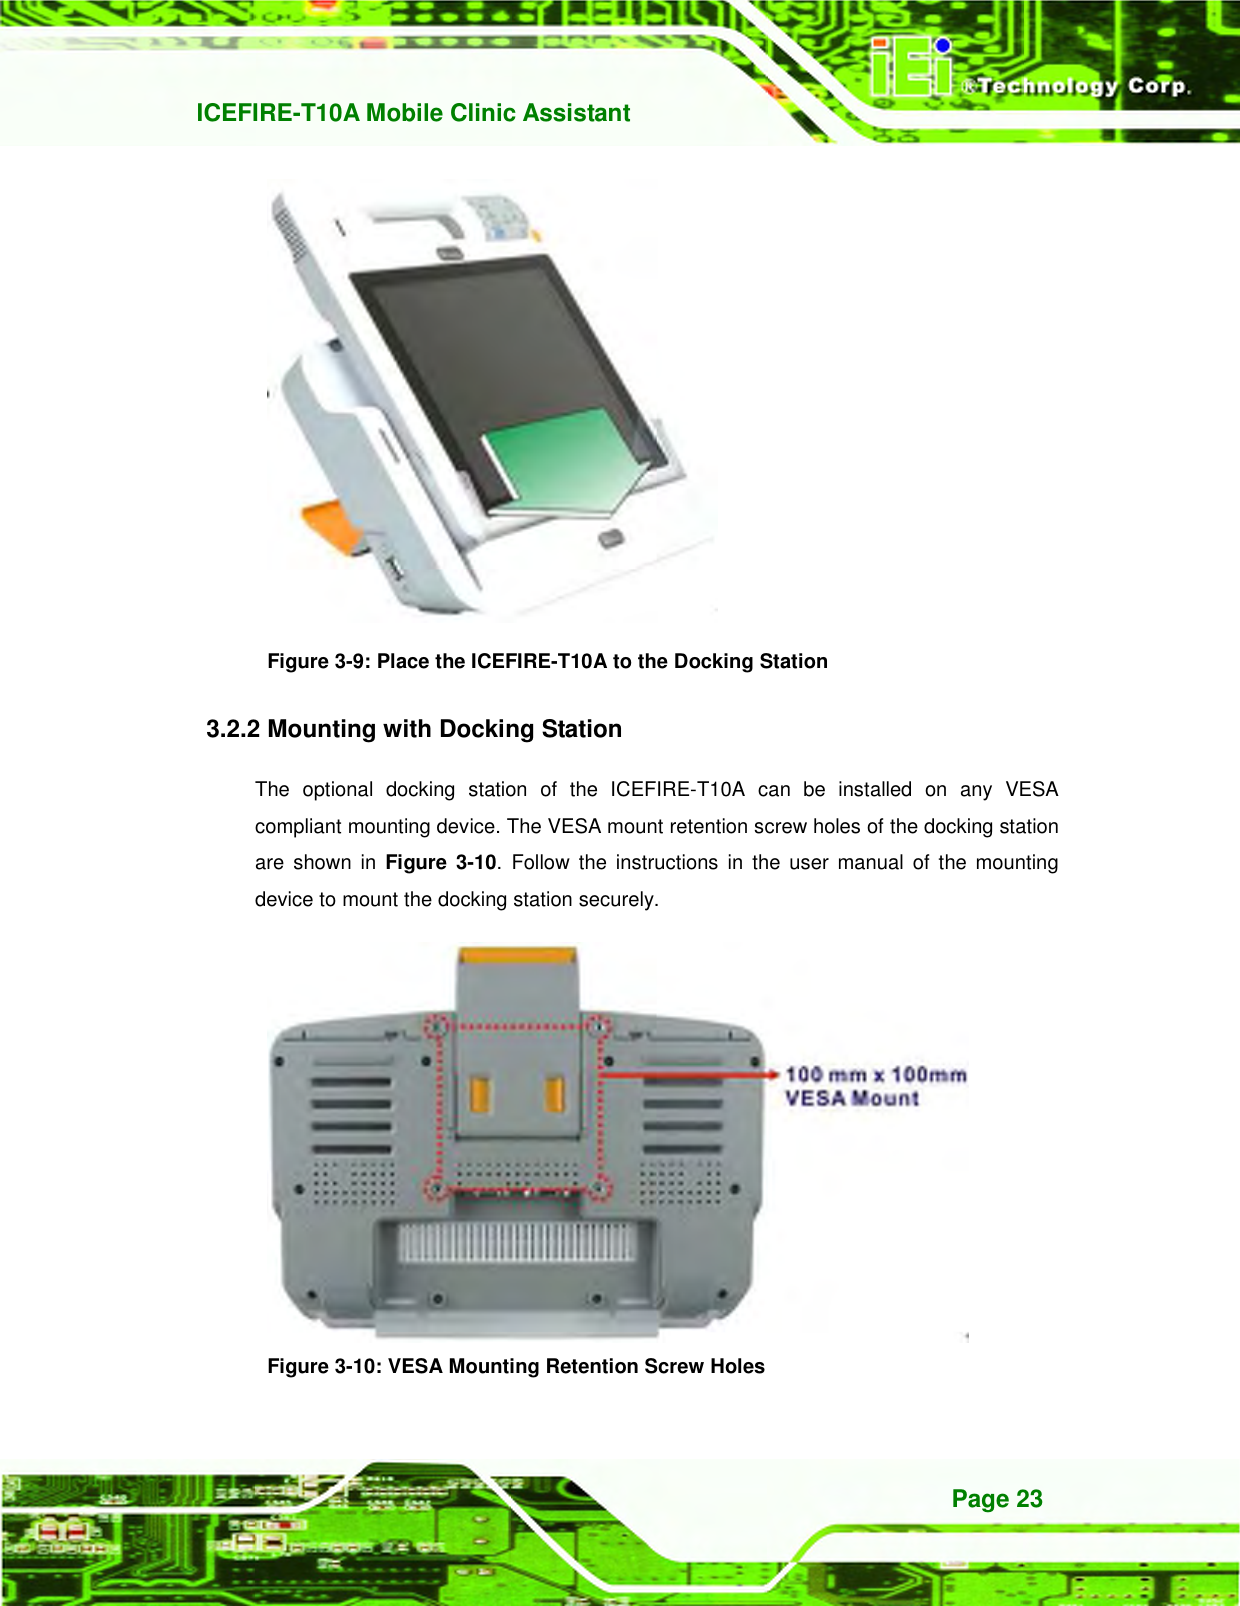   ICEFIRE-T10A Mobile Clinic Assistant Page 23  Figure 3-9: Place the ICEFIRE-T10A to the Docking Station 3.2.2 Mounting with Docking Station   The  optional  docking  station  of  the  ICEFIRE-T10A  can  be  installed  on  any  VESA compliant mounting device. The VESA mount retention screw holes of the docking station are  shown  in 483HFigure  3-10.  Follow  the  instructions  in the  user  manual  of the mounting device to mount the docking station securely.  Figure 3-10: VESA Mounting Retention Screw Holes 